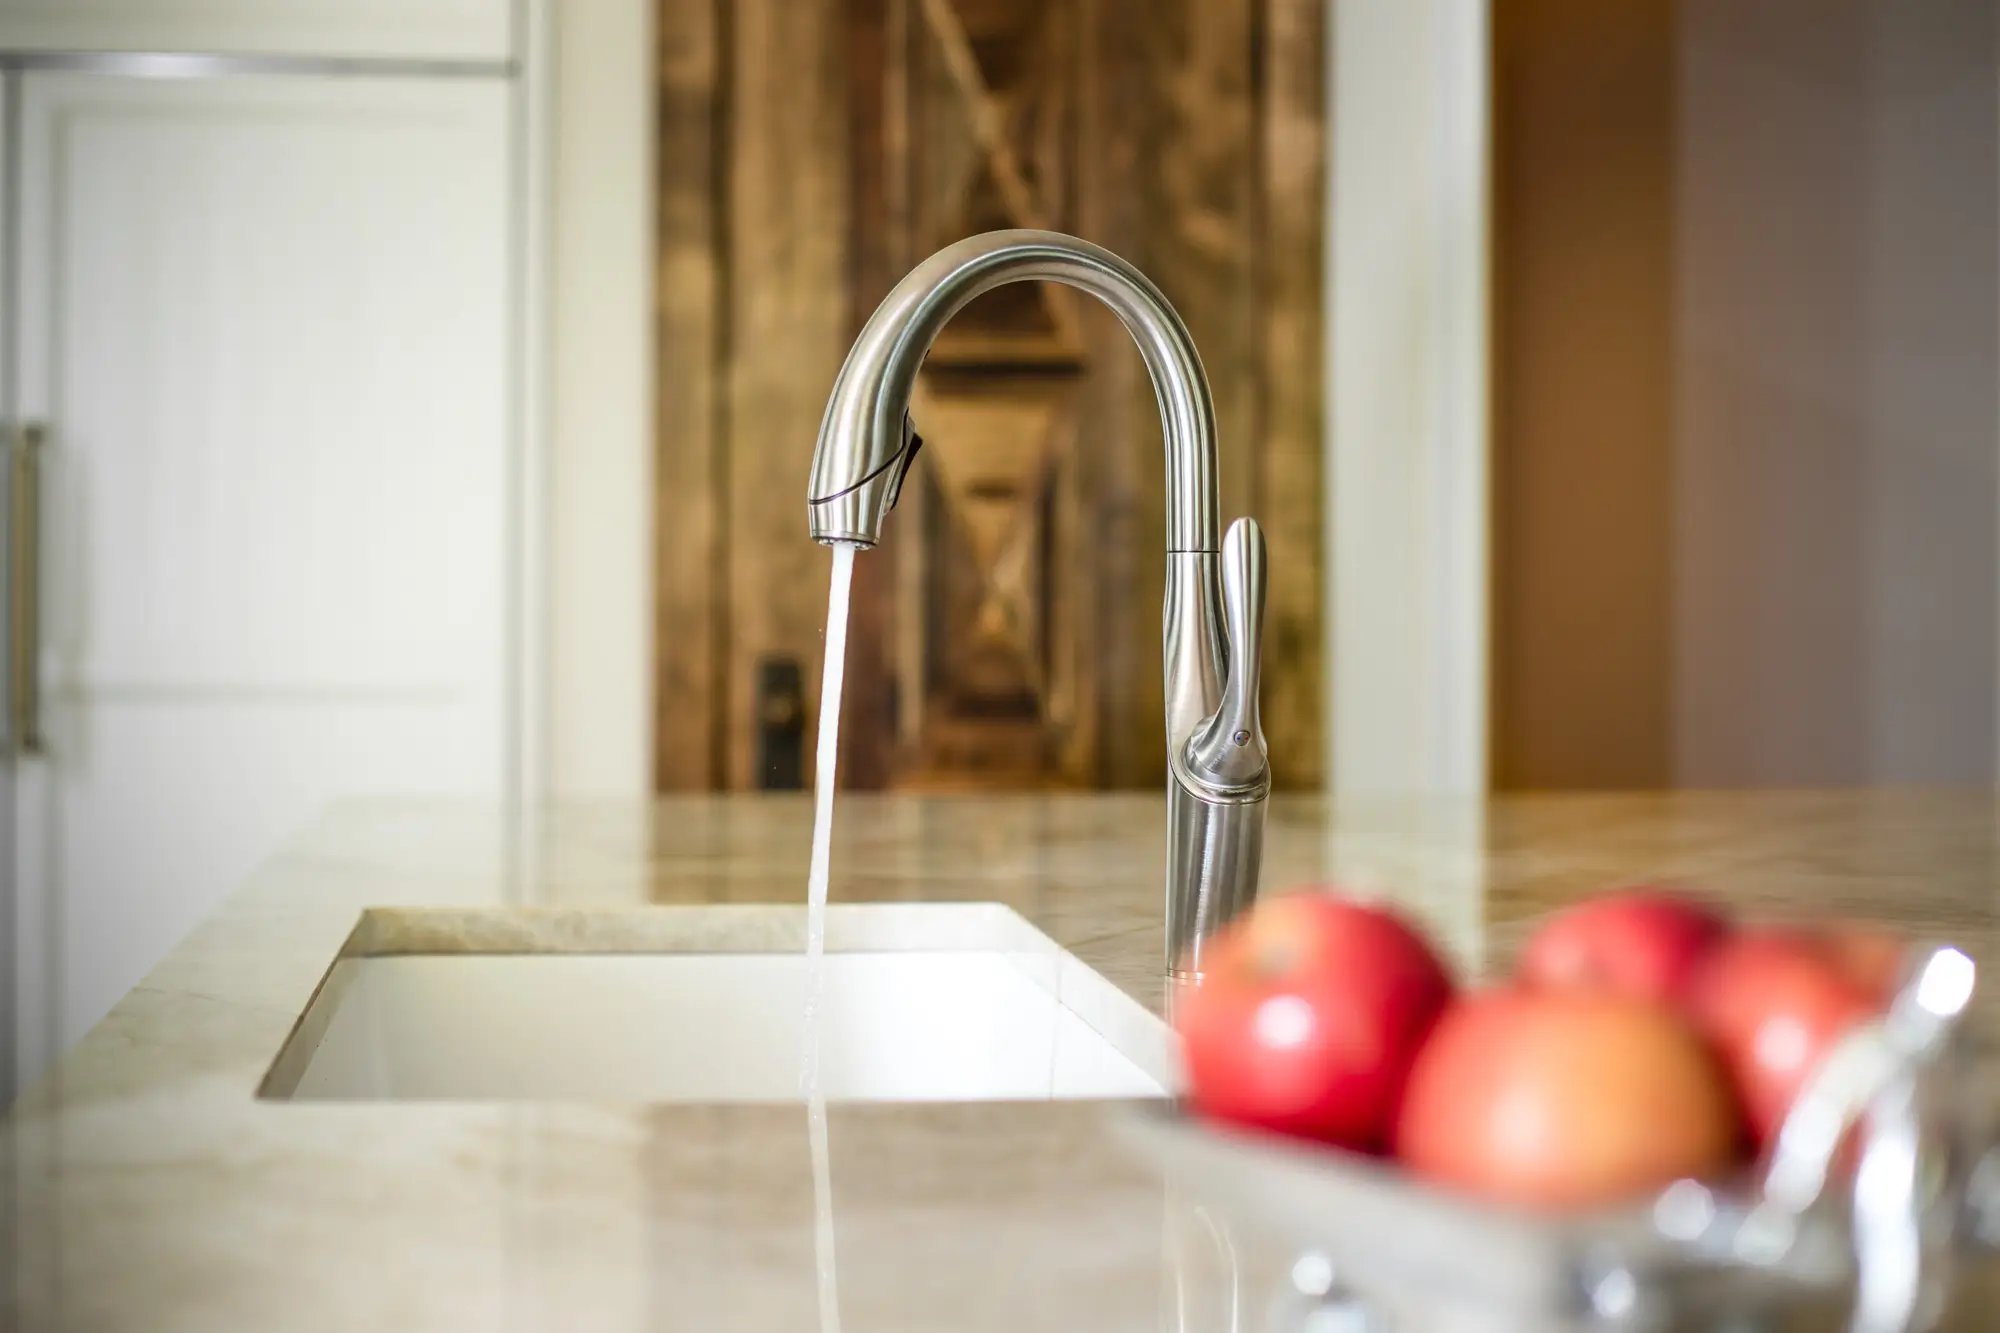  Modern kitchen faucet running water over sink with a blurred background of fresh apples and cabinetry.